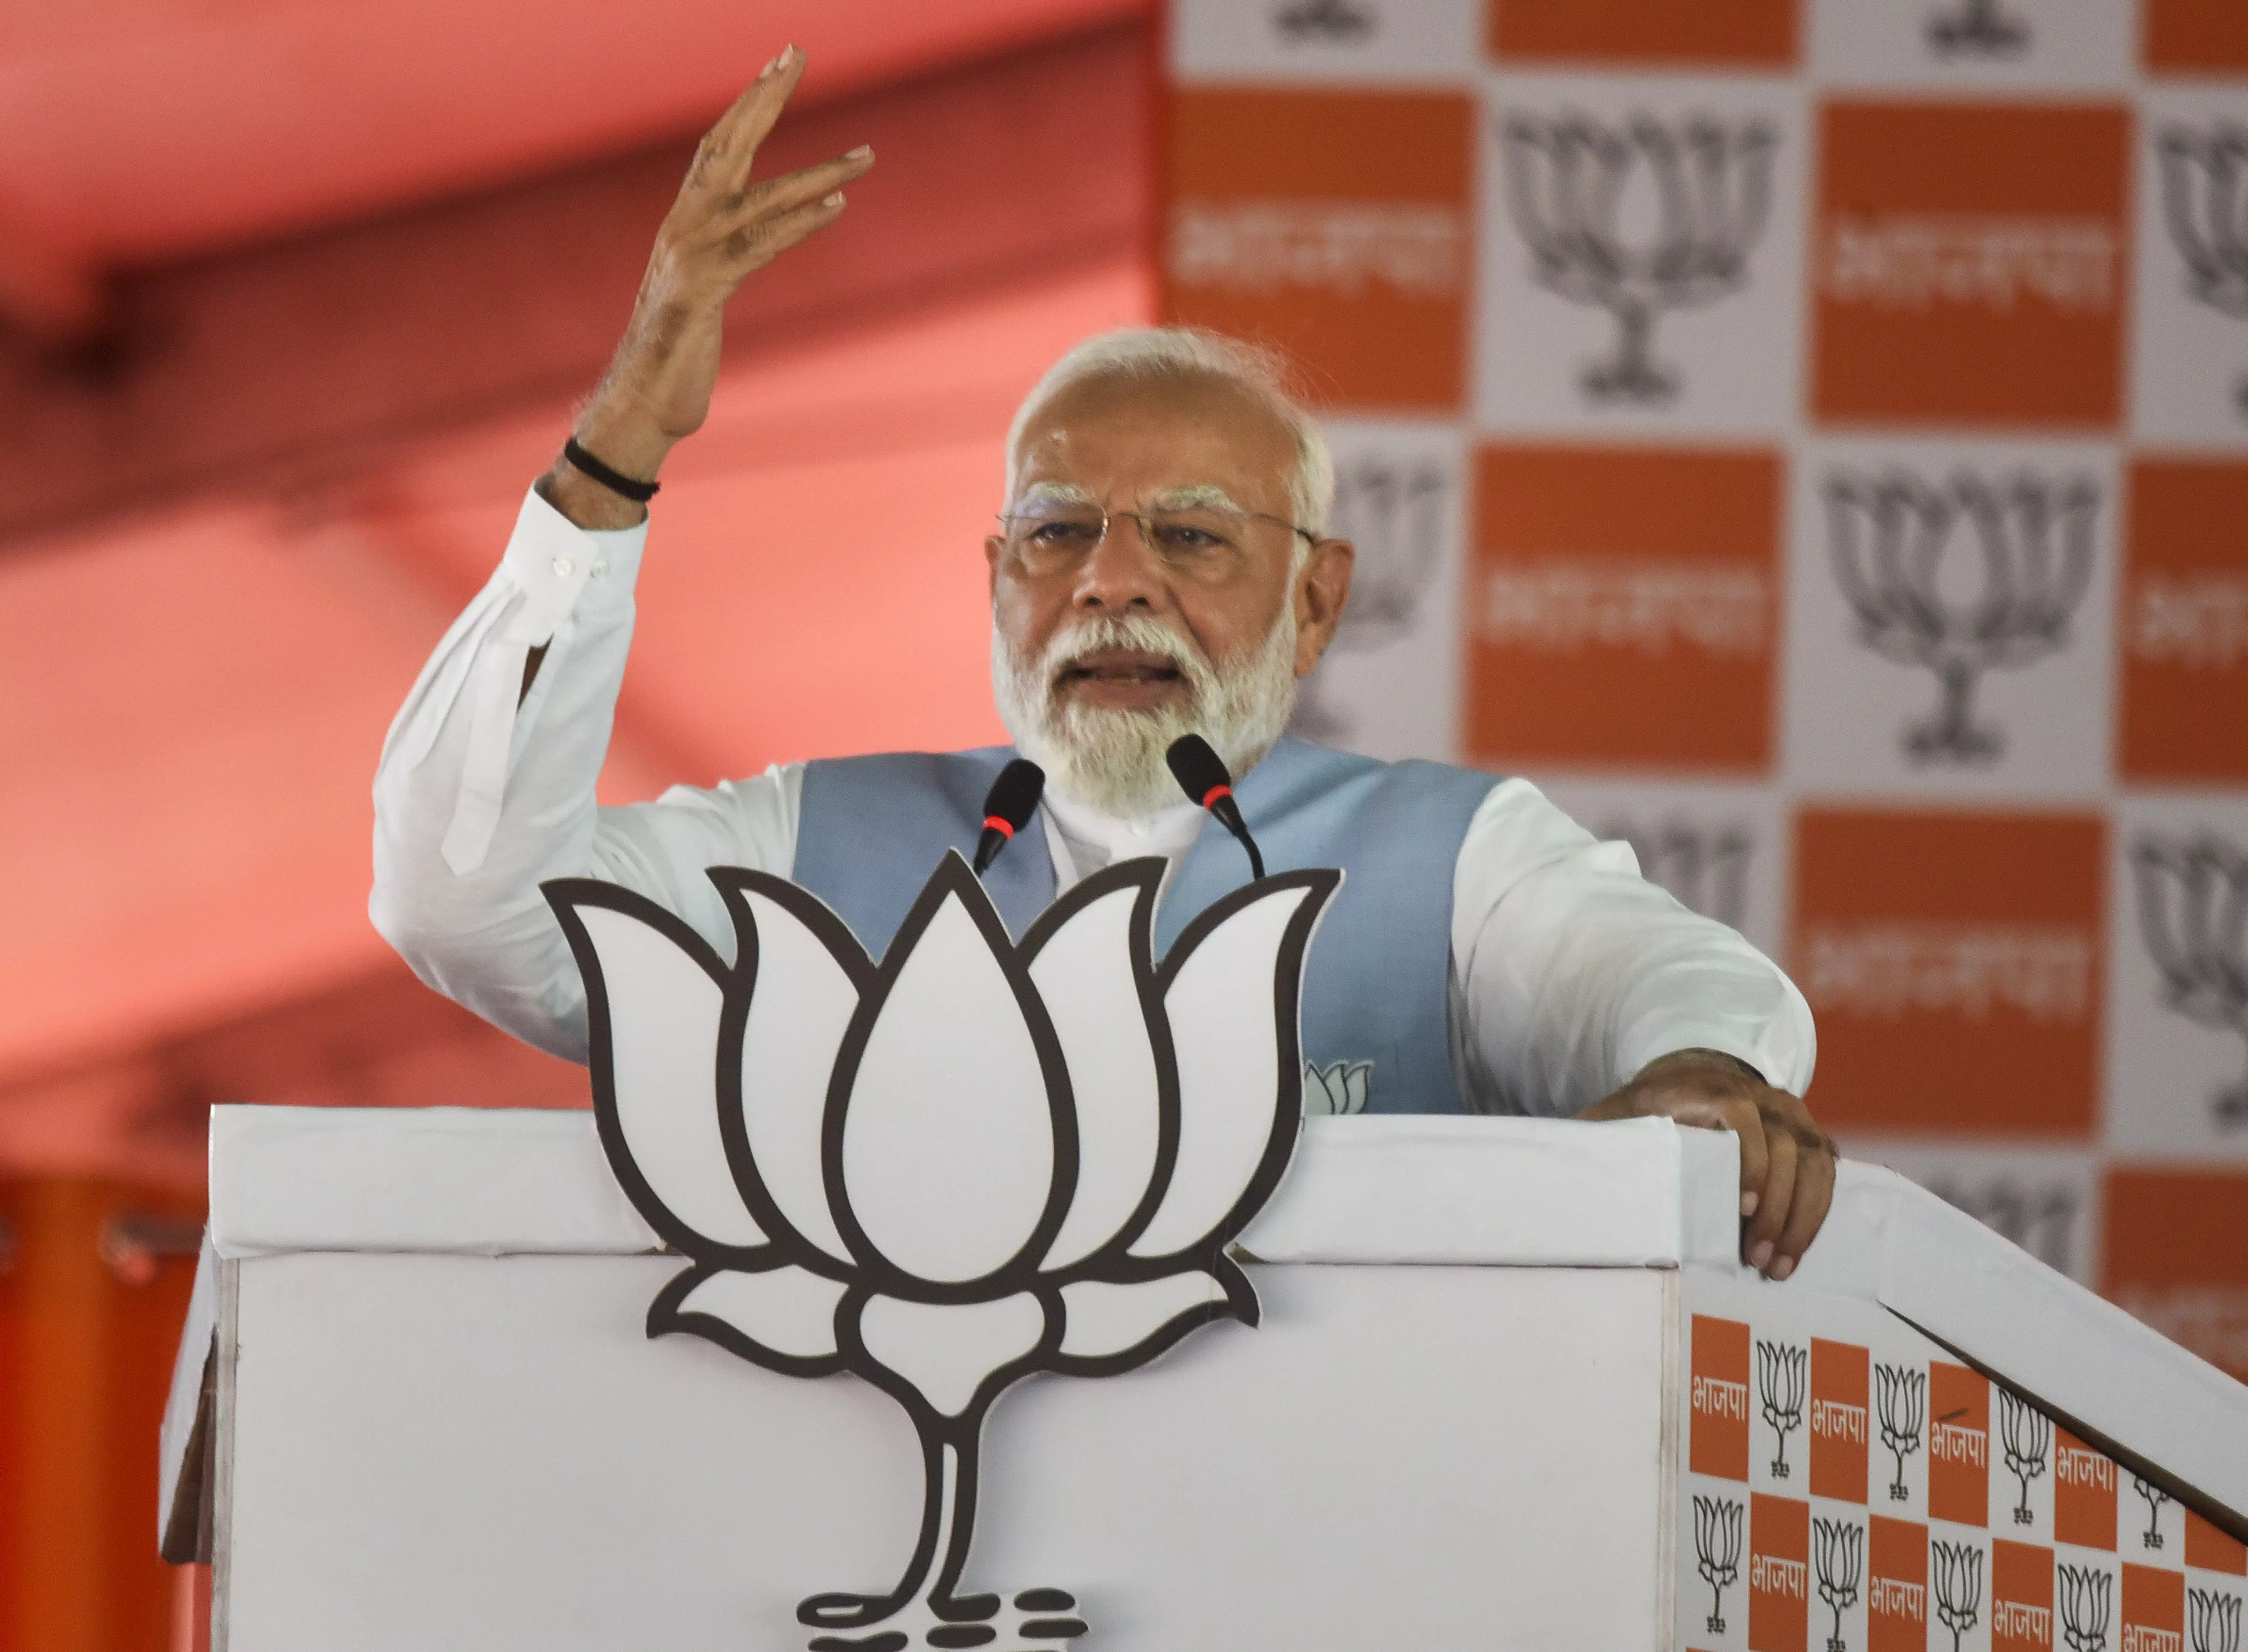 Rivals unable to take us on directly, spreading fake videos on social media: PM Modi